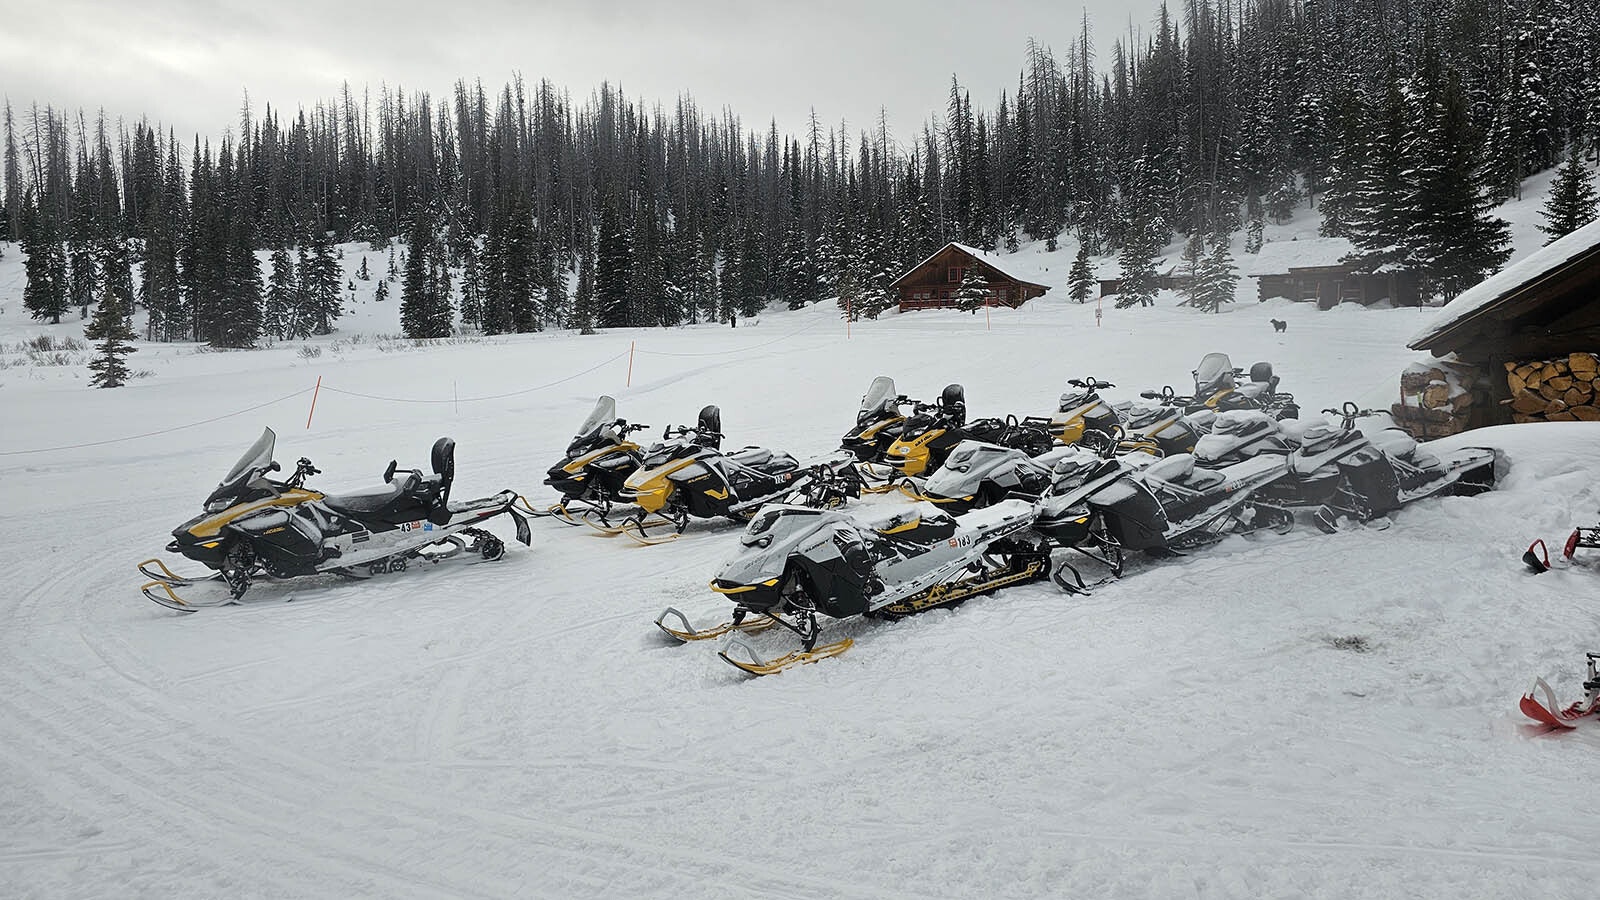 A fleet of high-performance snowmobiles at the ready for Brooks Lake Lodge guests.